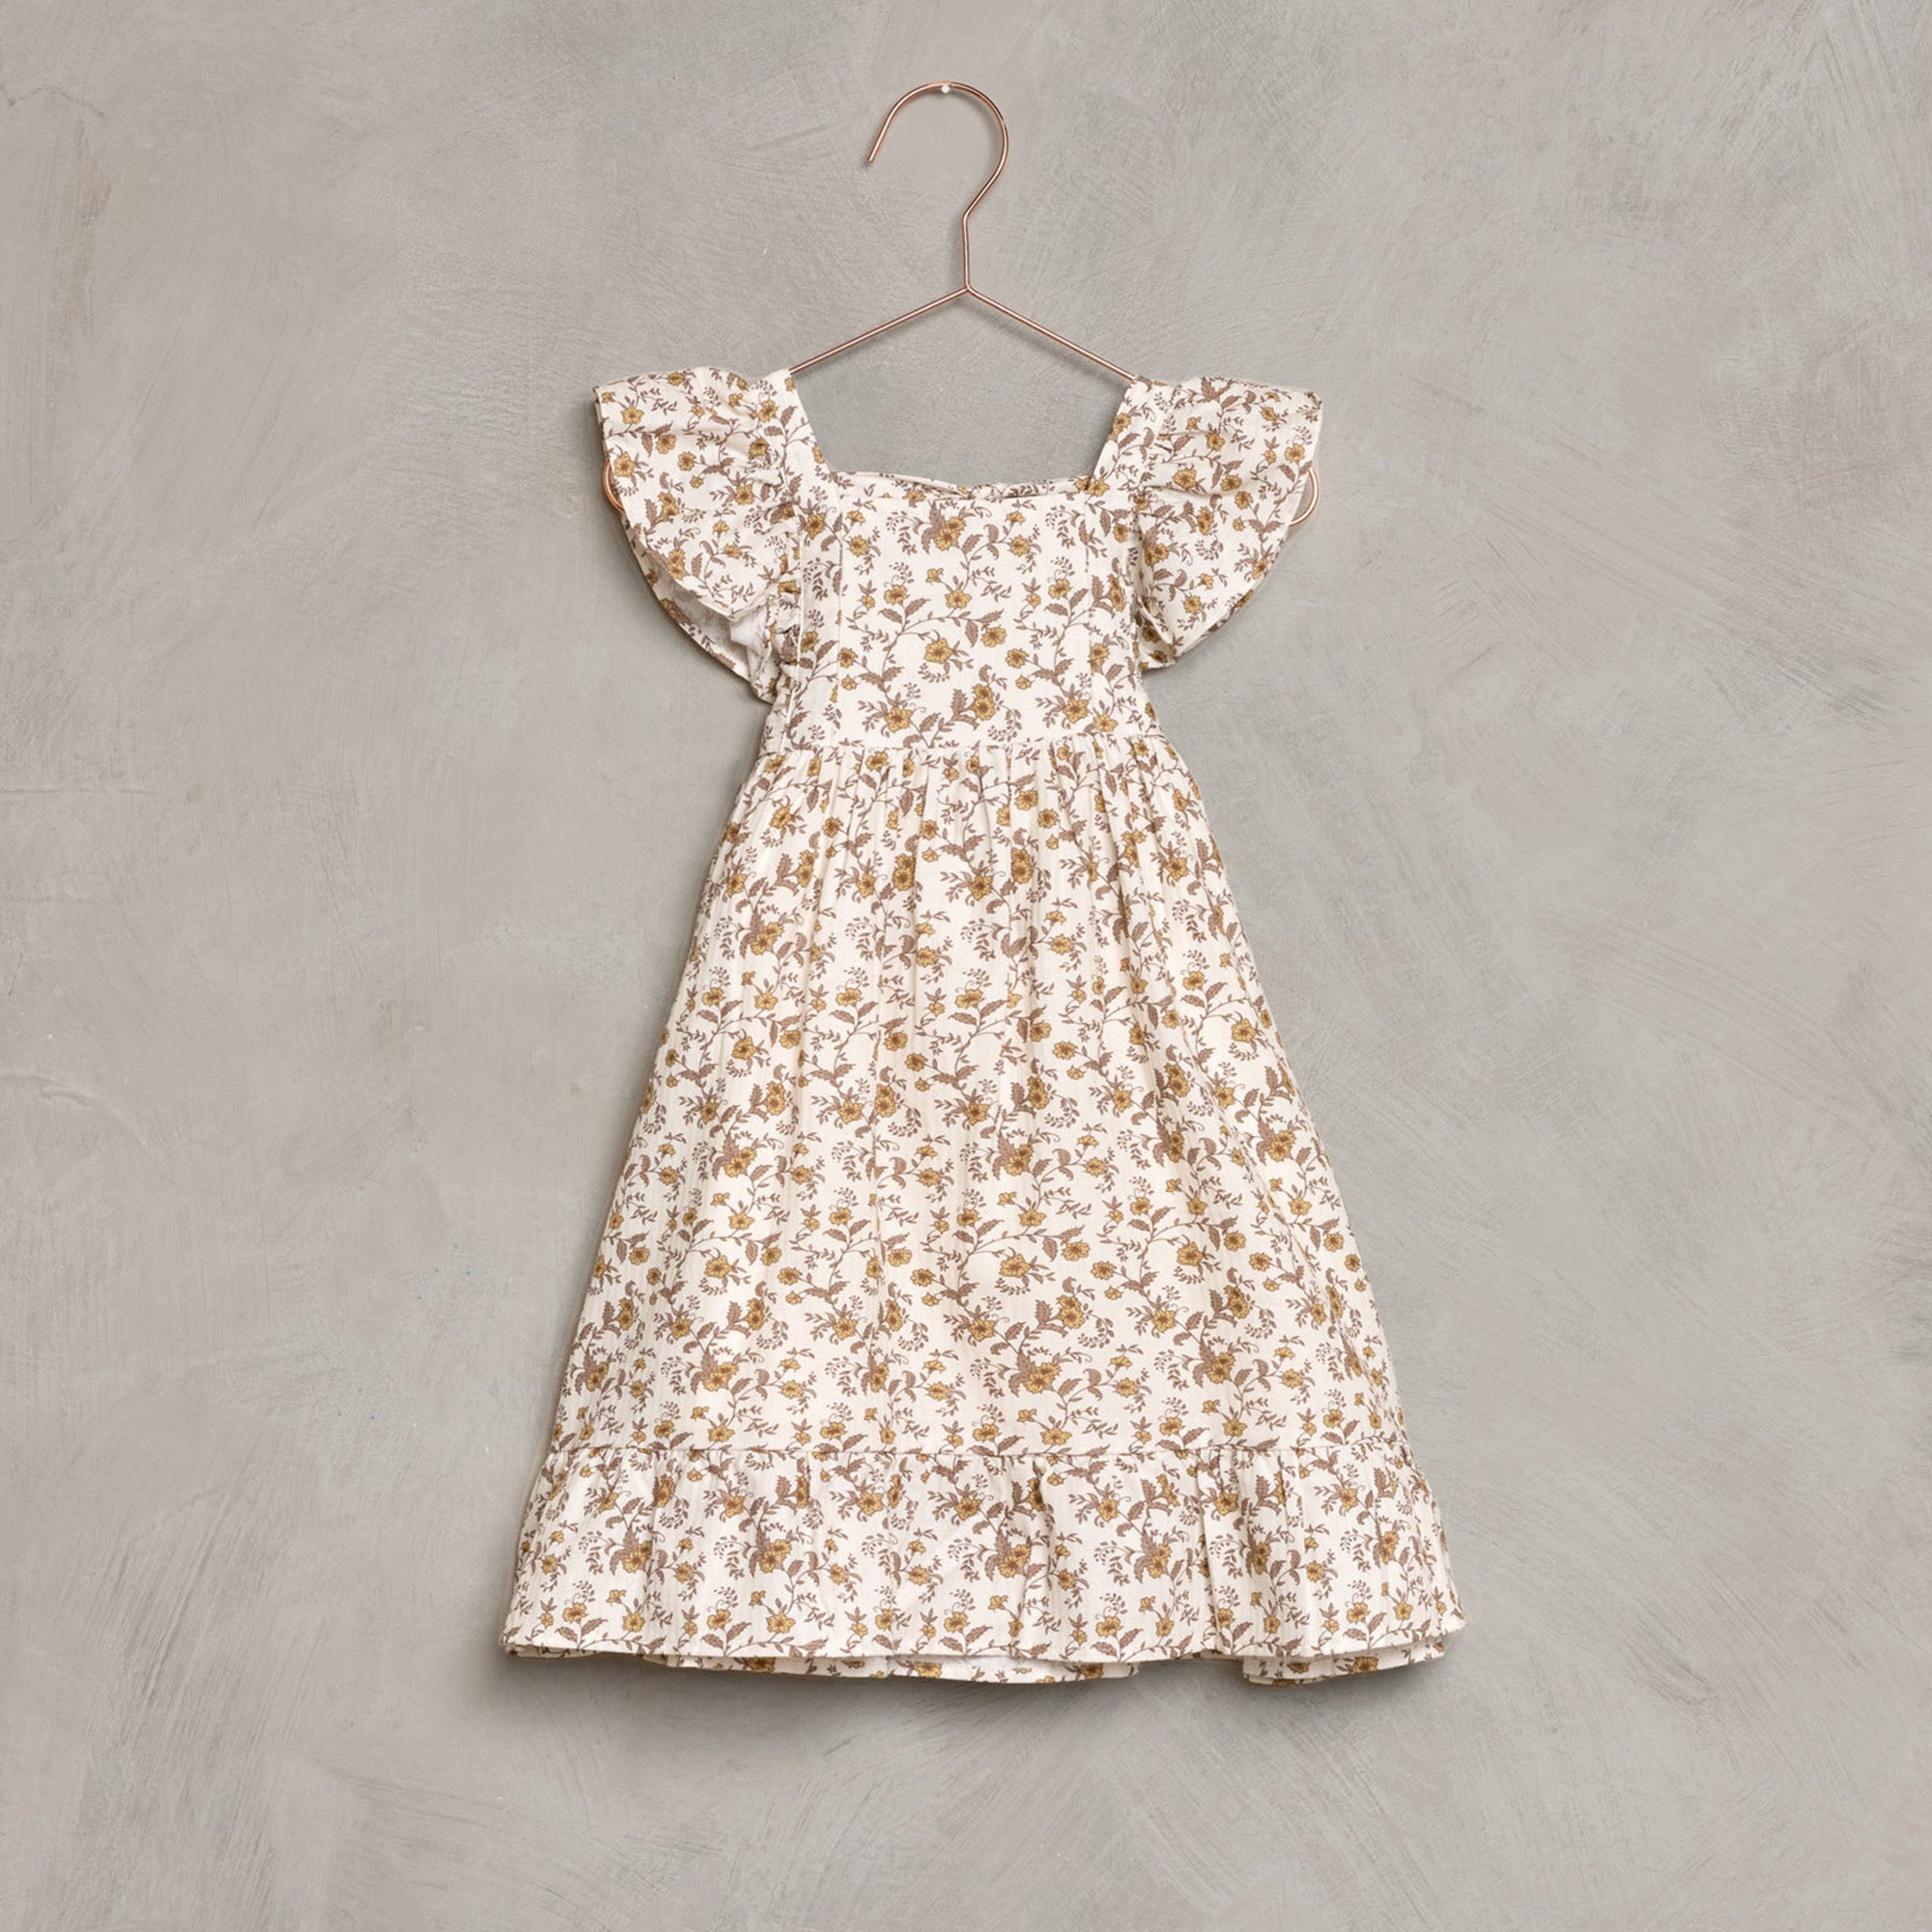 Noralee_Lucy Dress Golden Vibes_Dresses